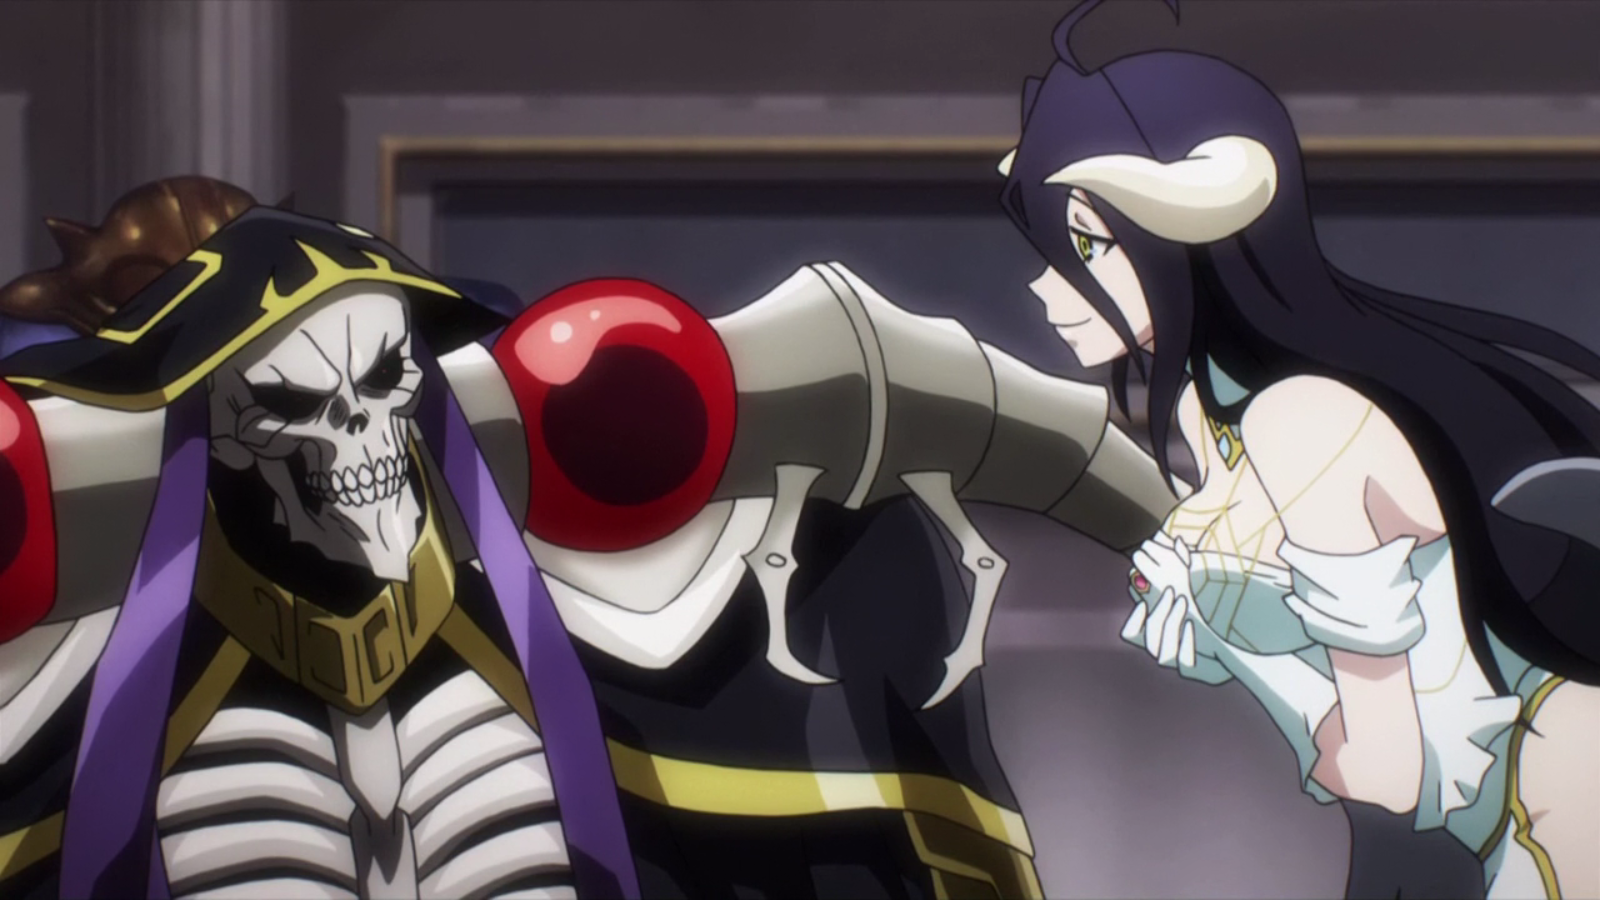 Image Overlord Ep05 005 Png Overlord Wiki Fandom